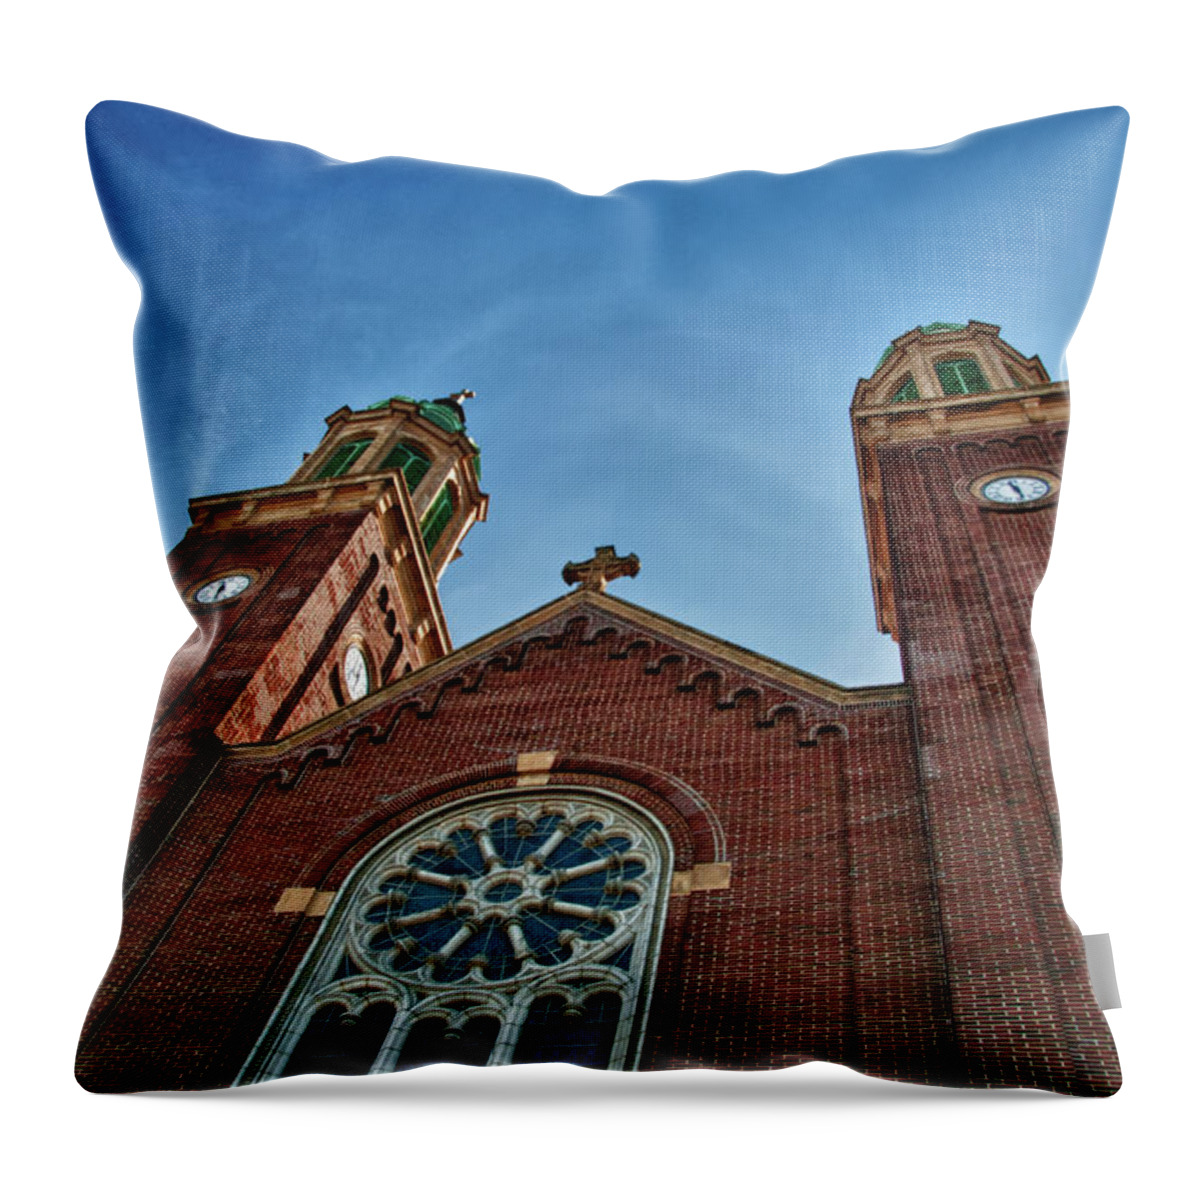  Architecture Throw Pillow featuring the photograph Amherst Street 3451 by Guy Whiteley